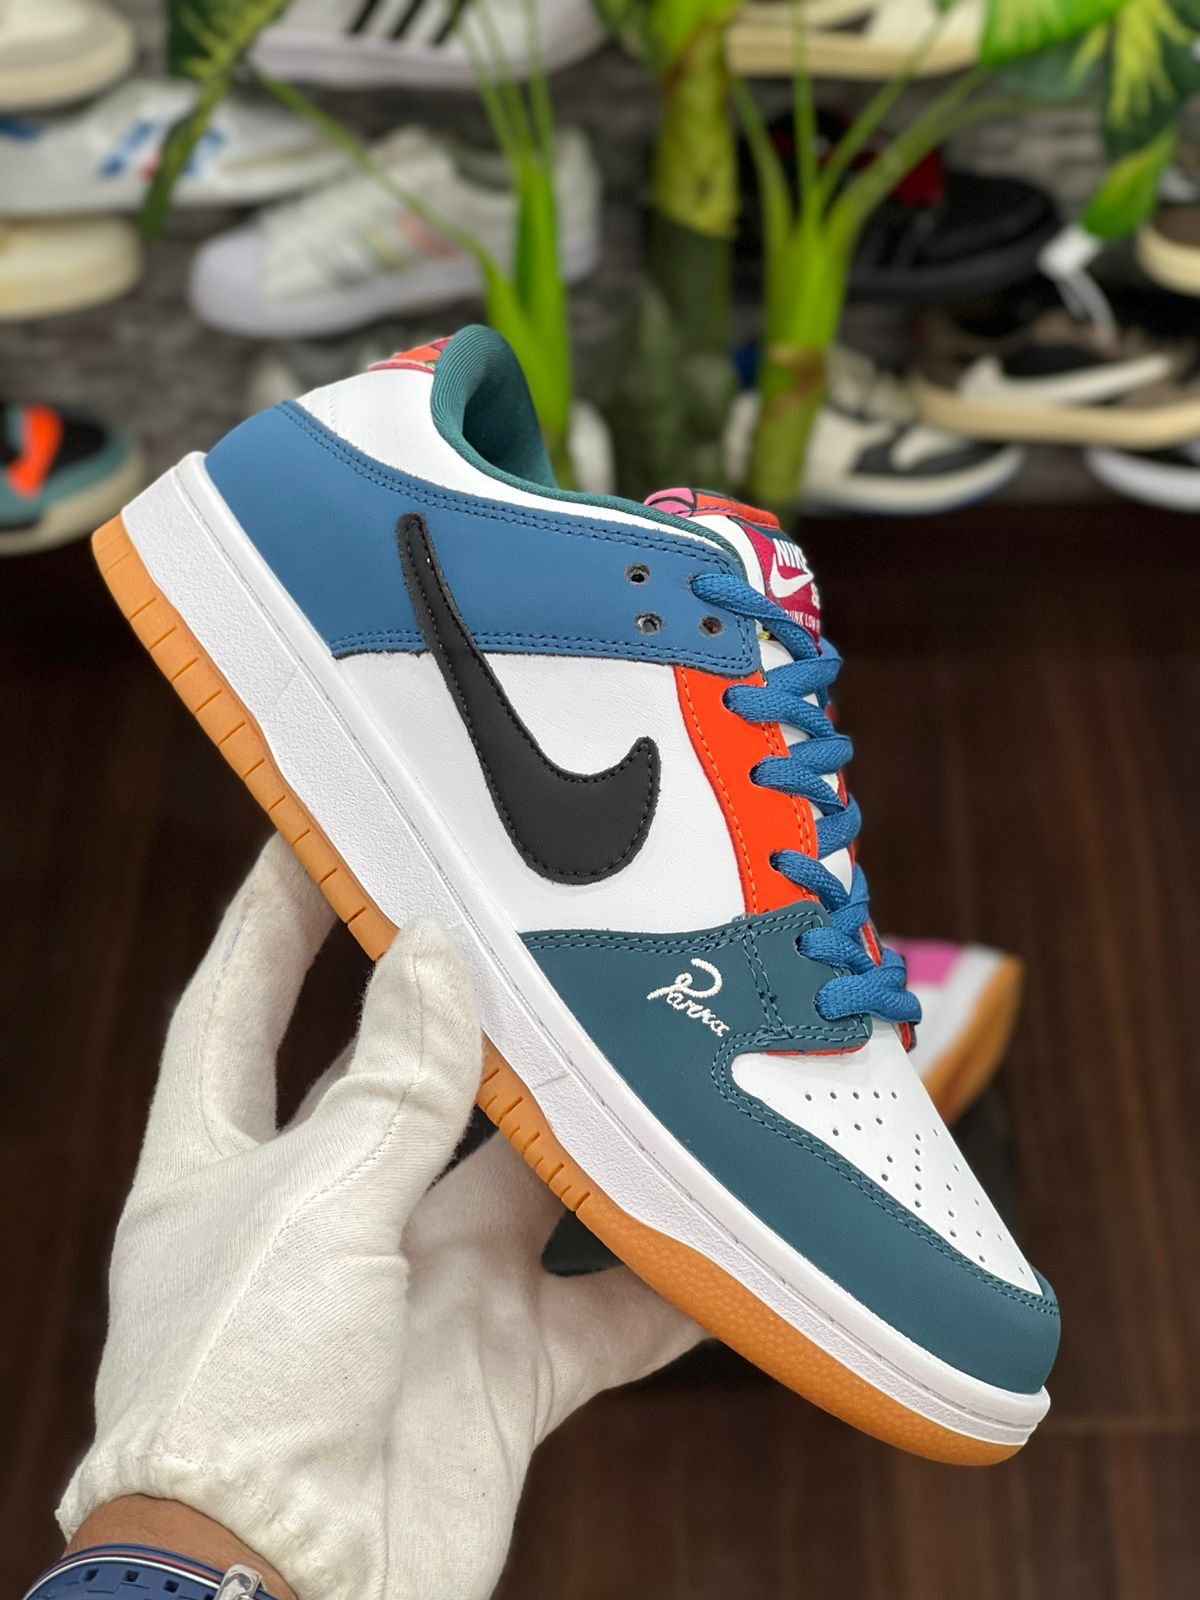 SB Dunk Parra Sneakers In Stock High Quality